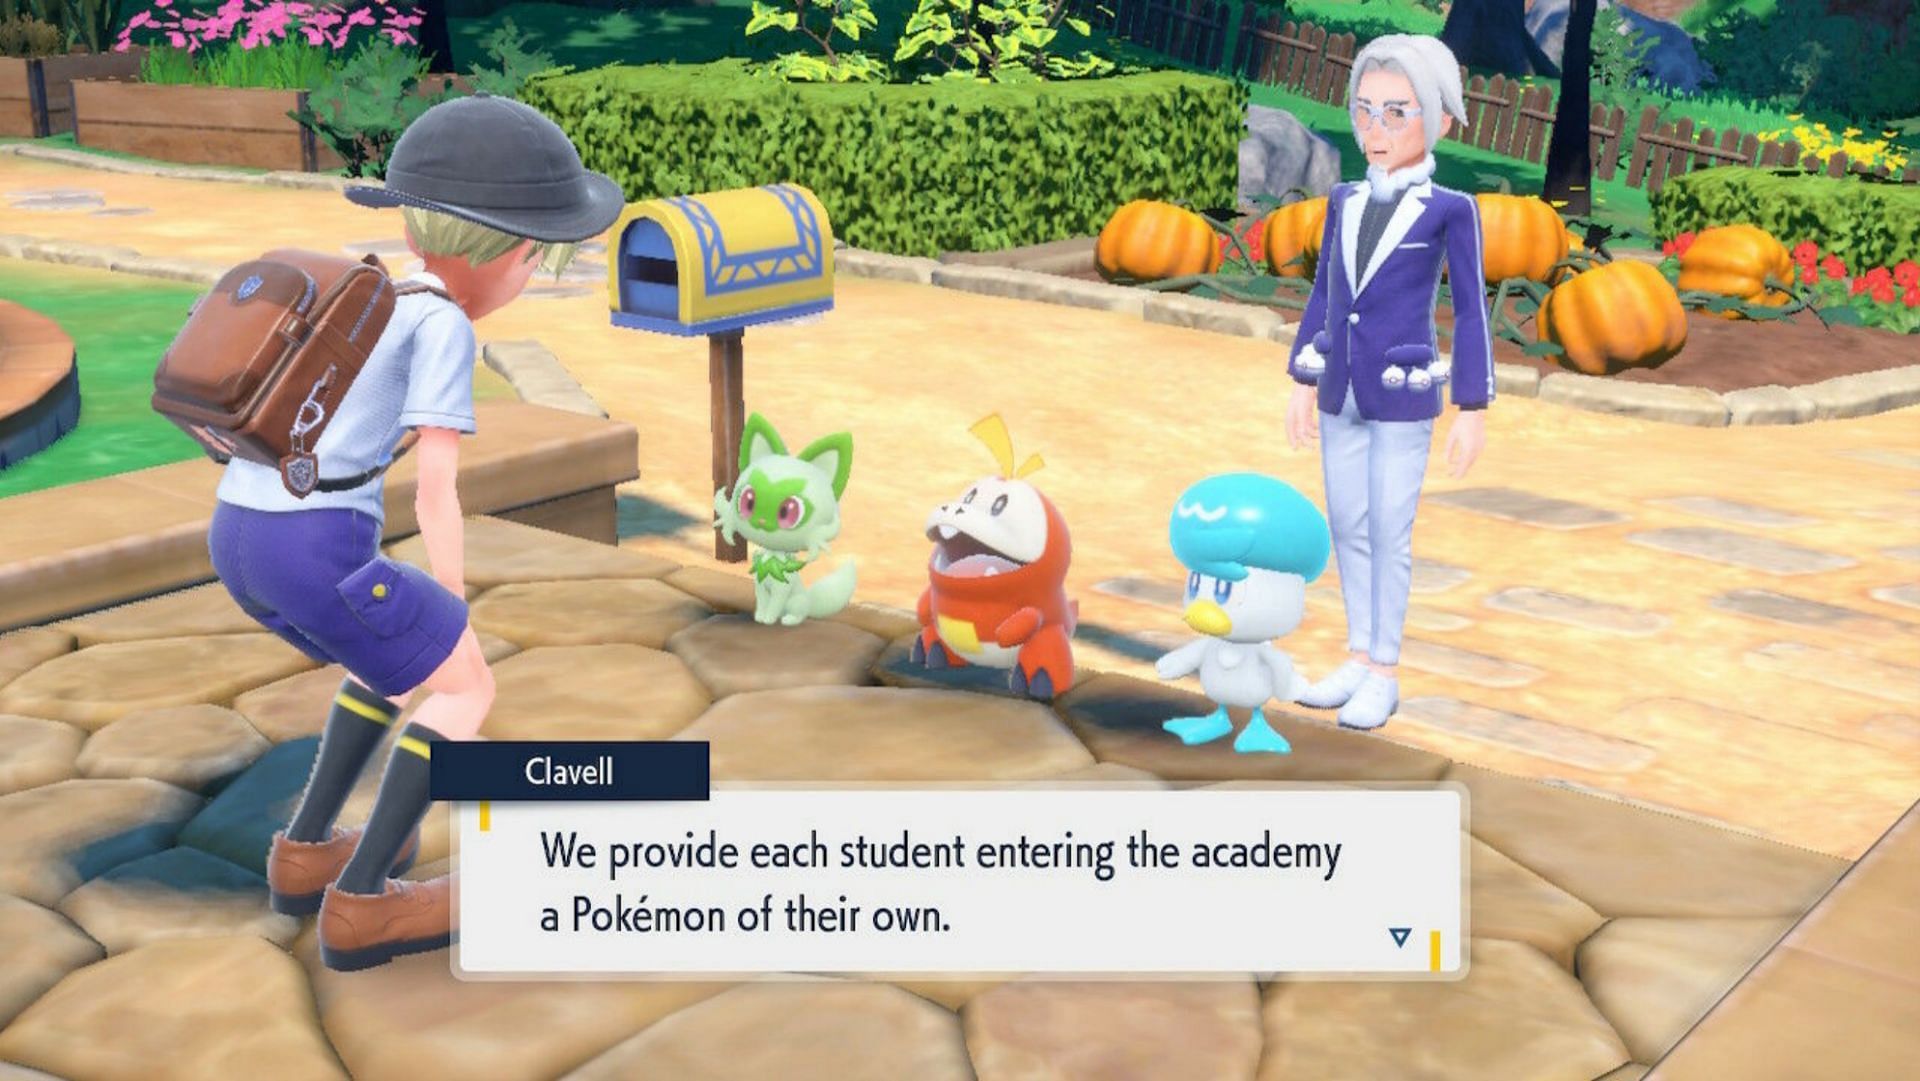 Are all Pokemon Scarlet and Violet starters shiny locked?